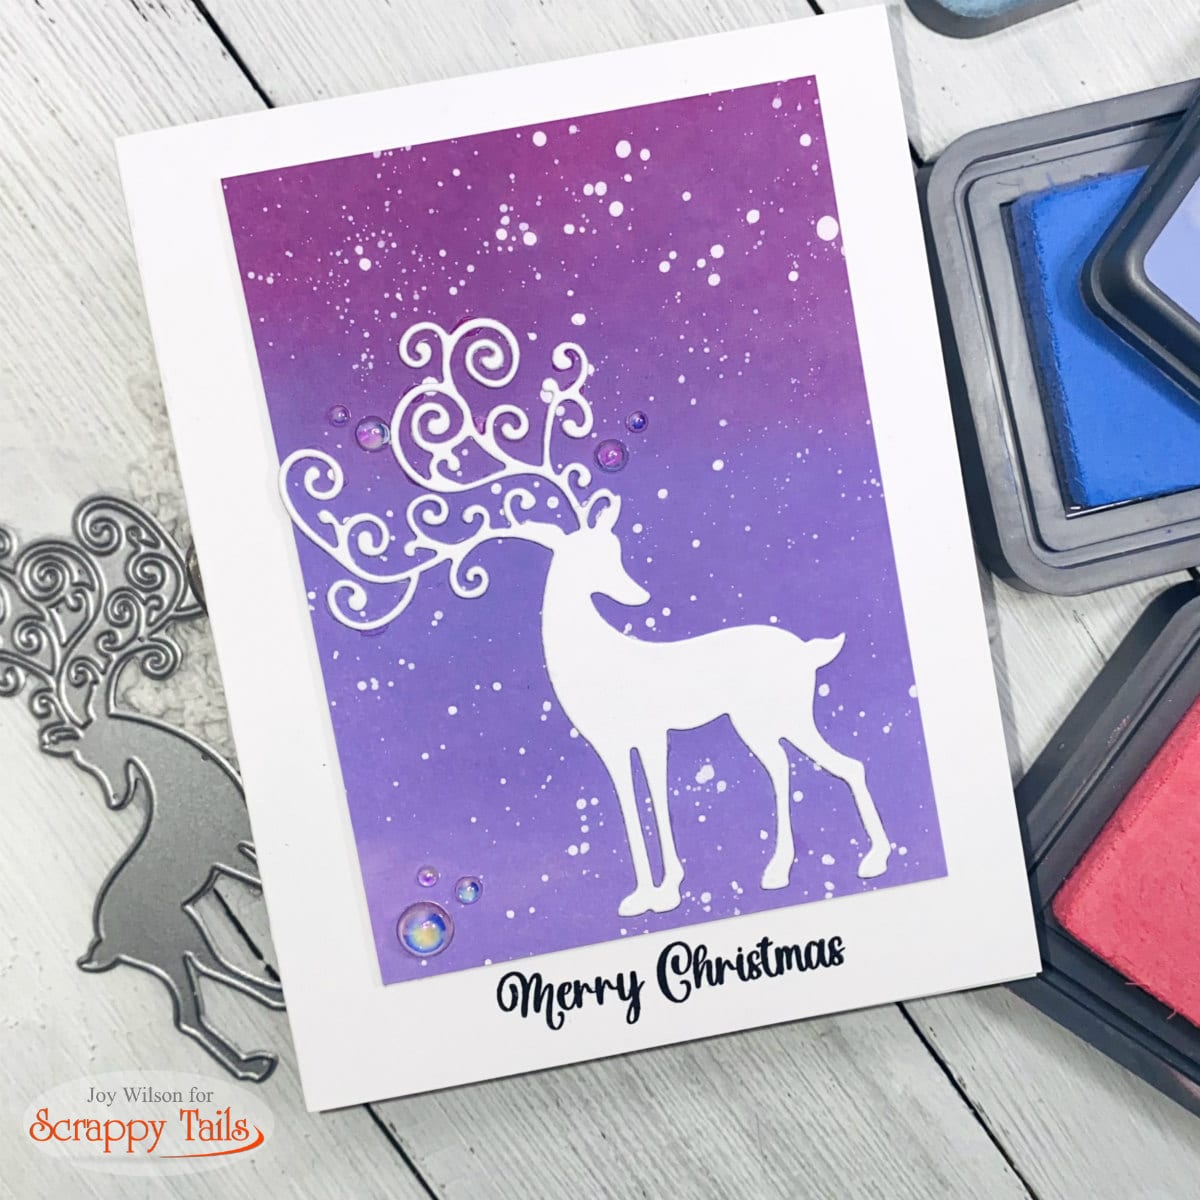 Quick and Fun Snowy Christmas Cards